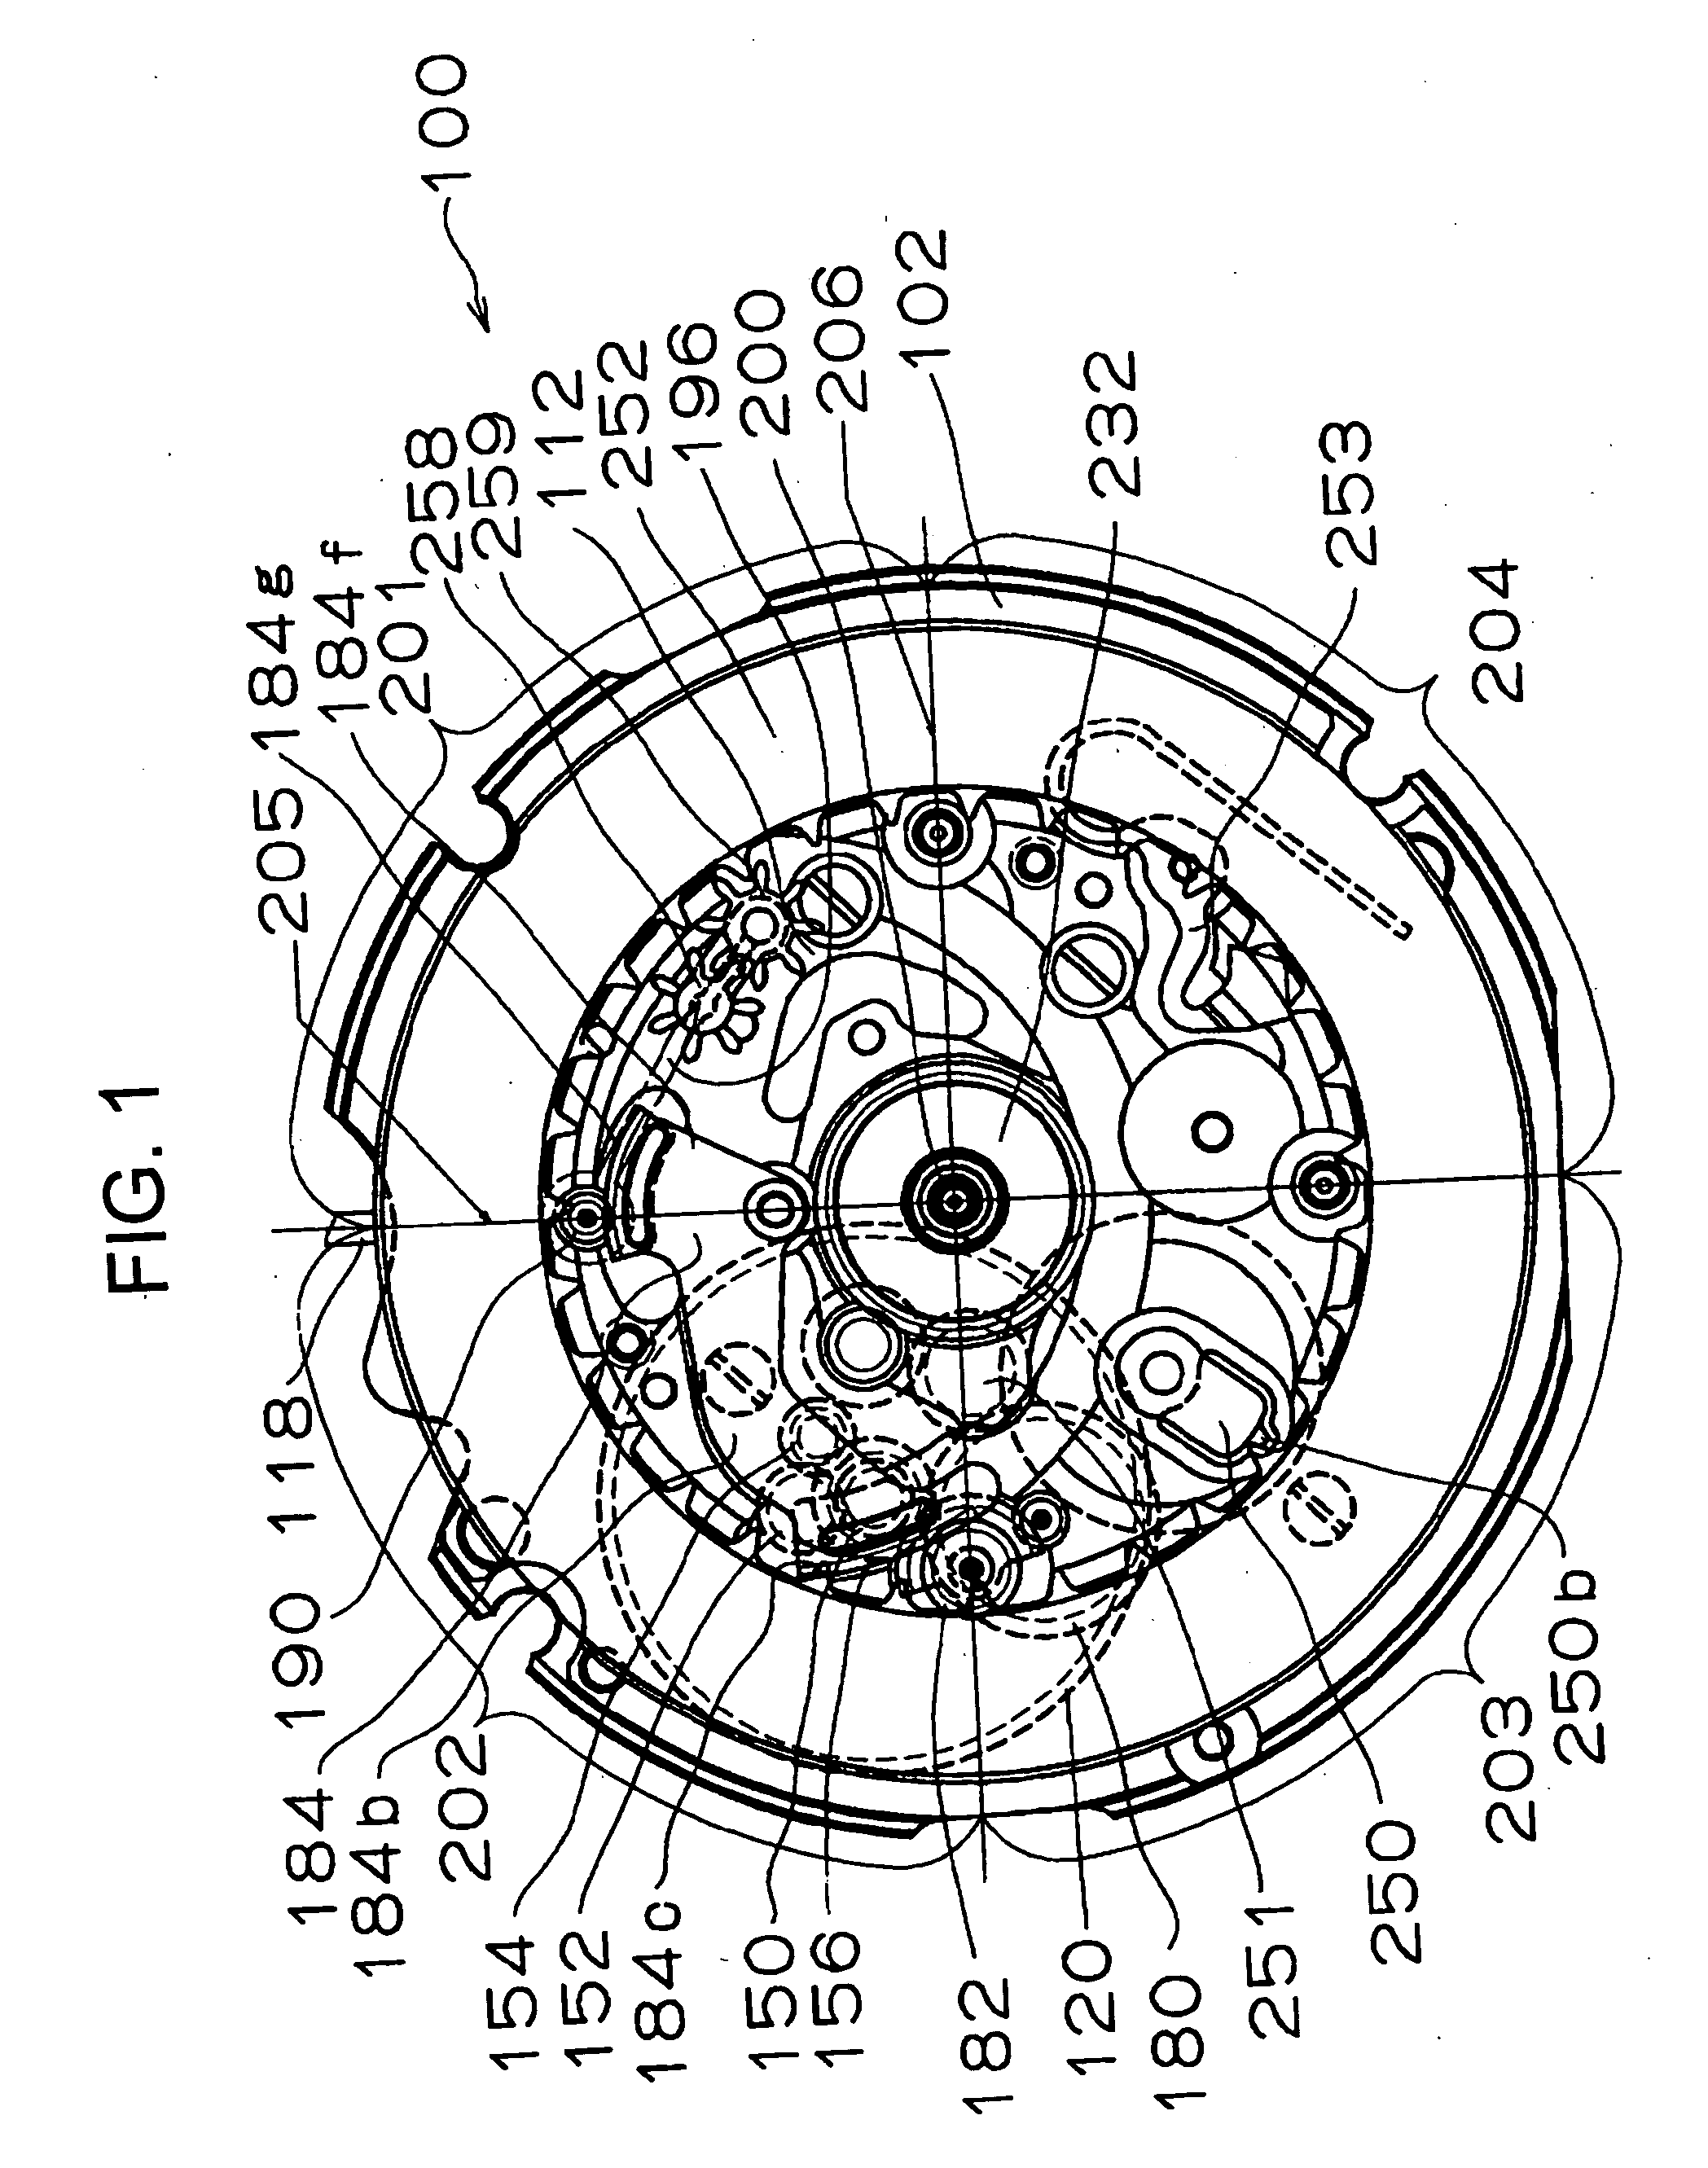 Timepiece having mainspring winding state display apparatus including deformed segment gear